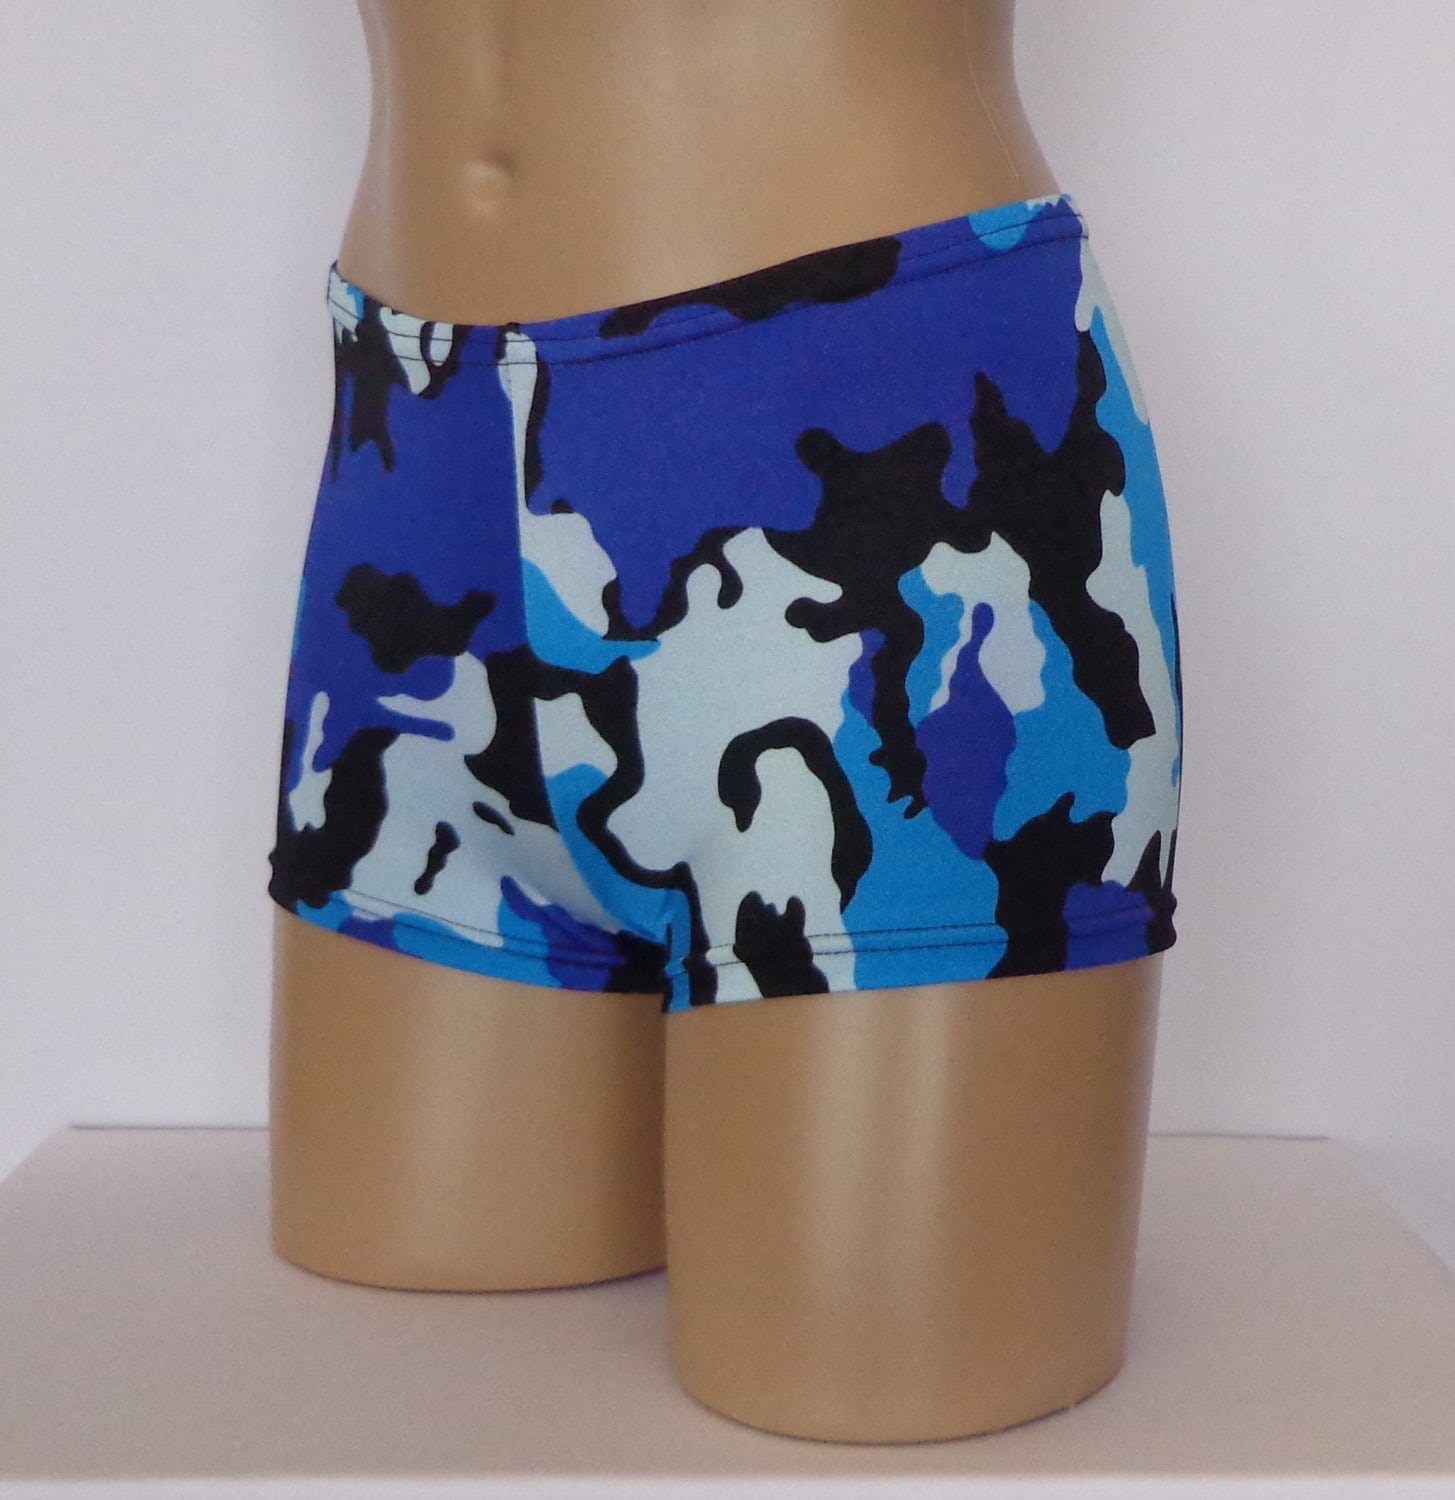 5 Colors Camouflage Booty Shorts Spandex Lycra by TrinaWear